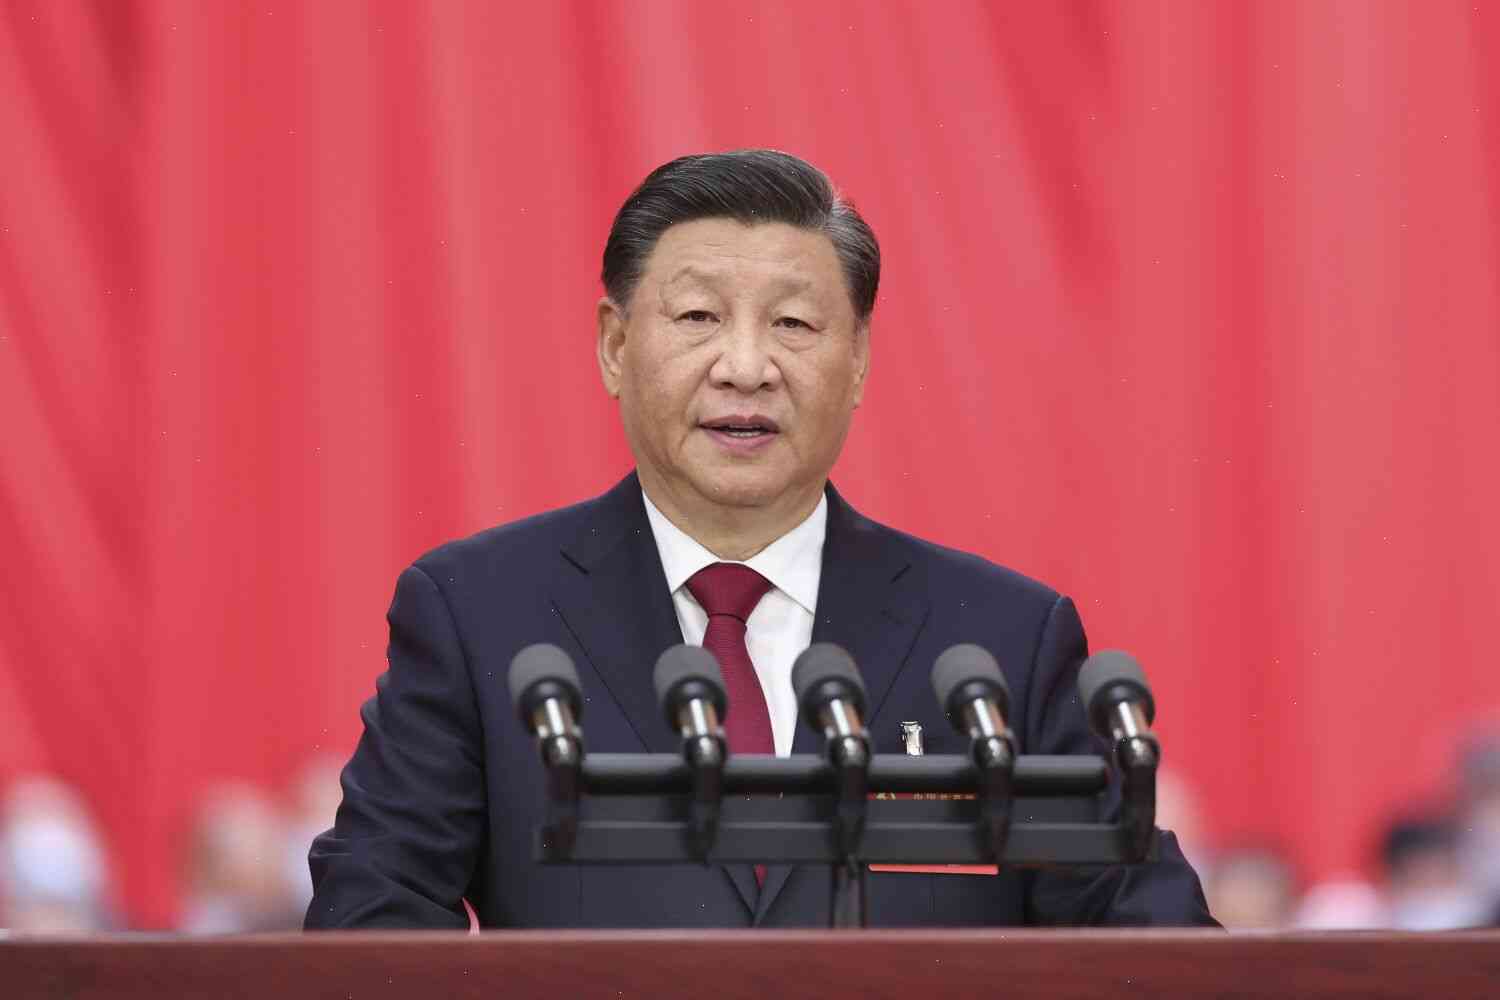 What You Need to Know About Xi Jinping’s Unprecedented Third Year as China’s President